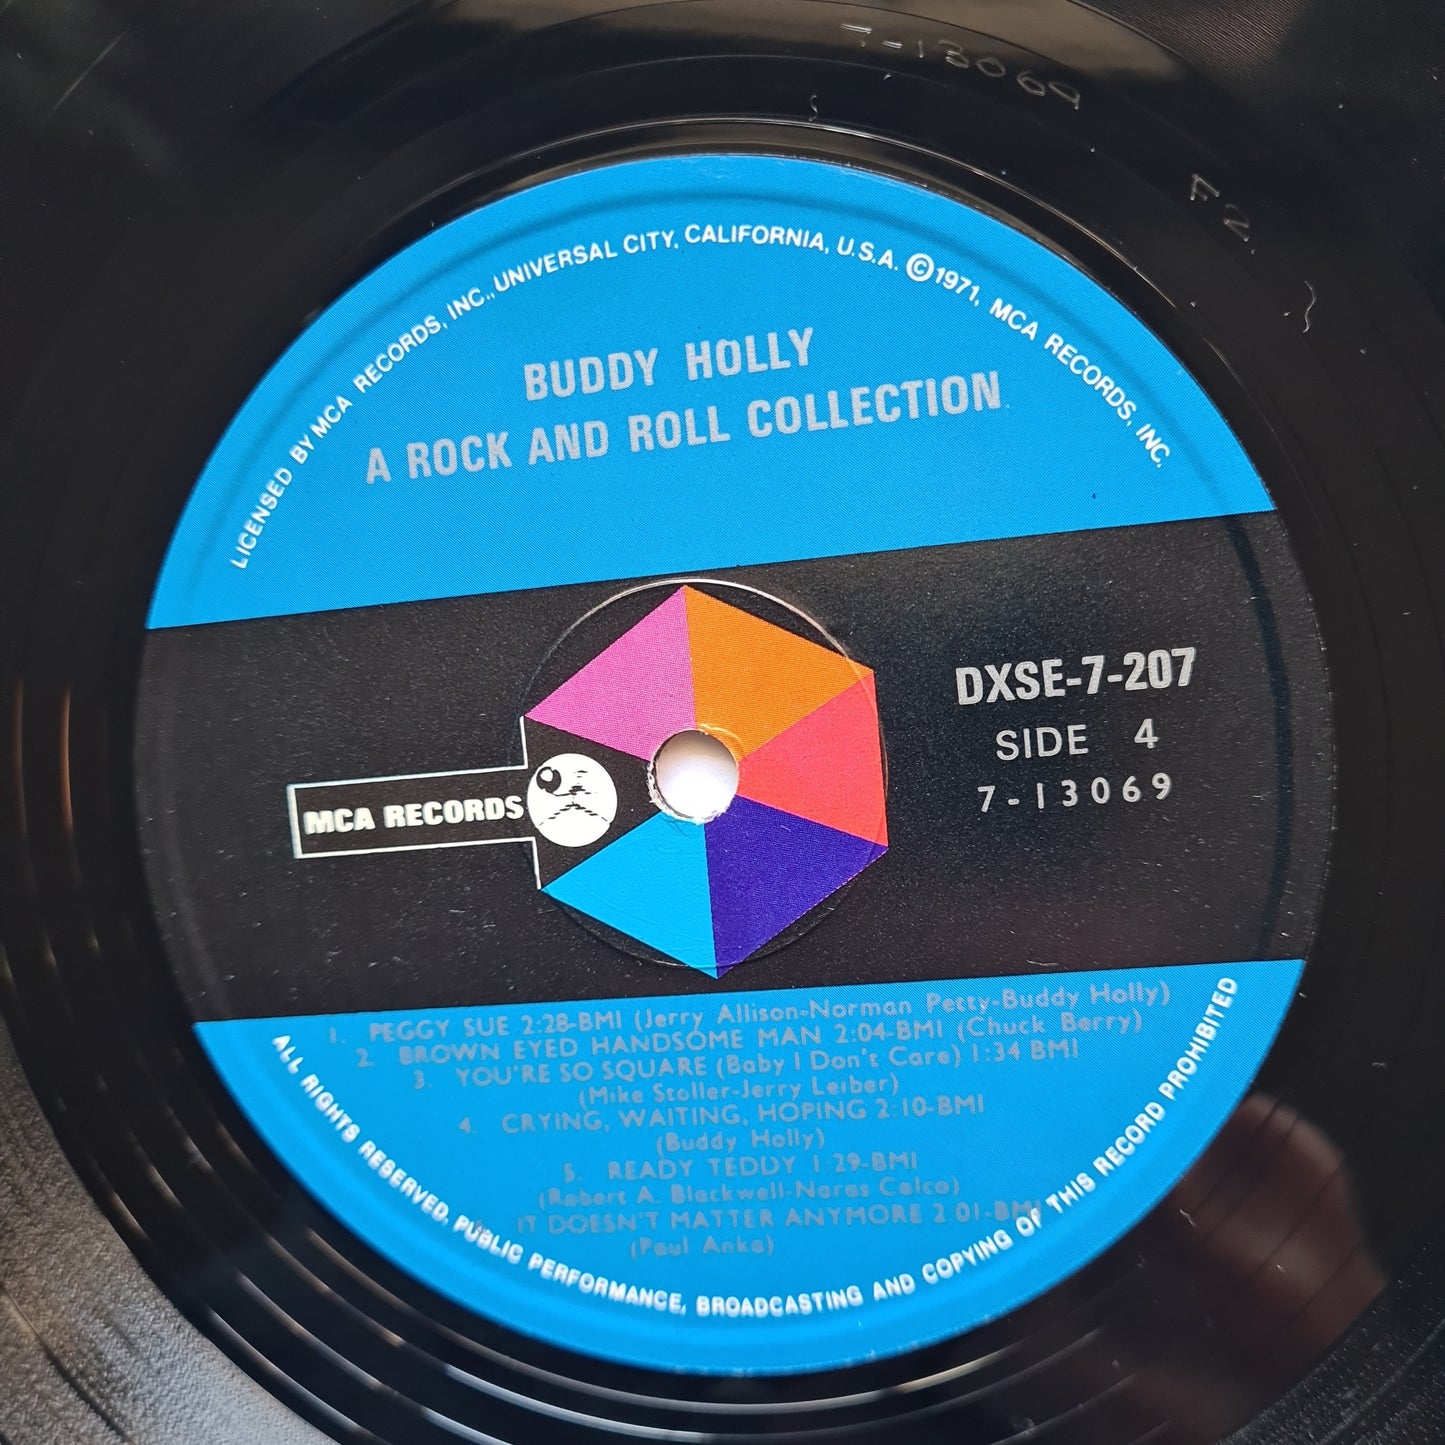 Buddy Holly – A Rock & Roll Collection - 1972 (2LP Gatefold) - Vinyl Record